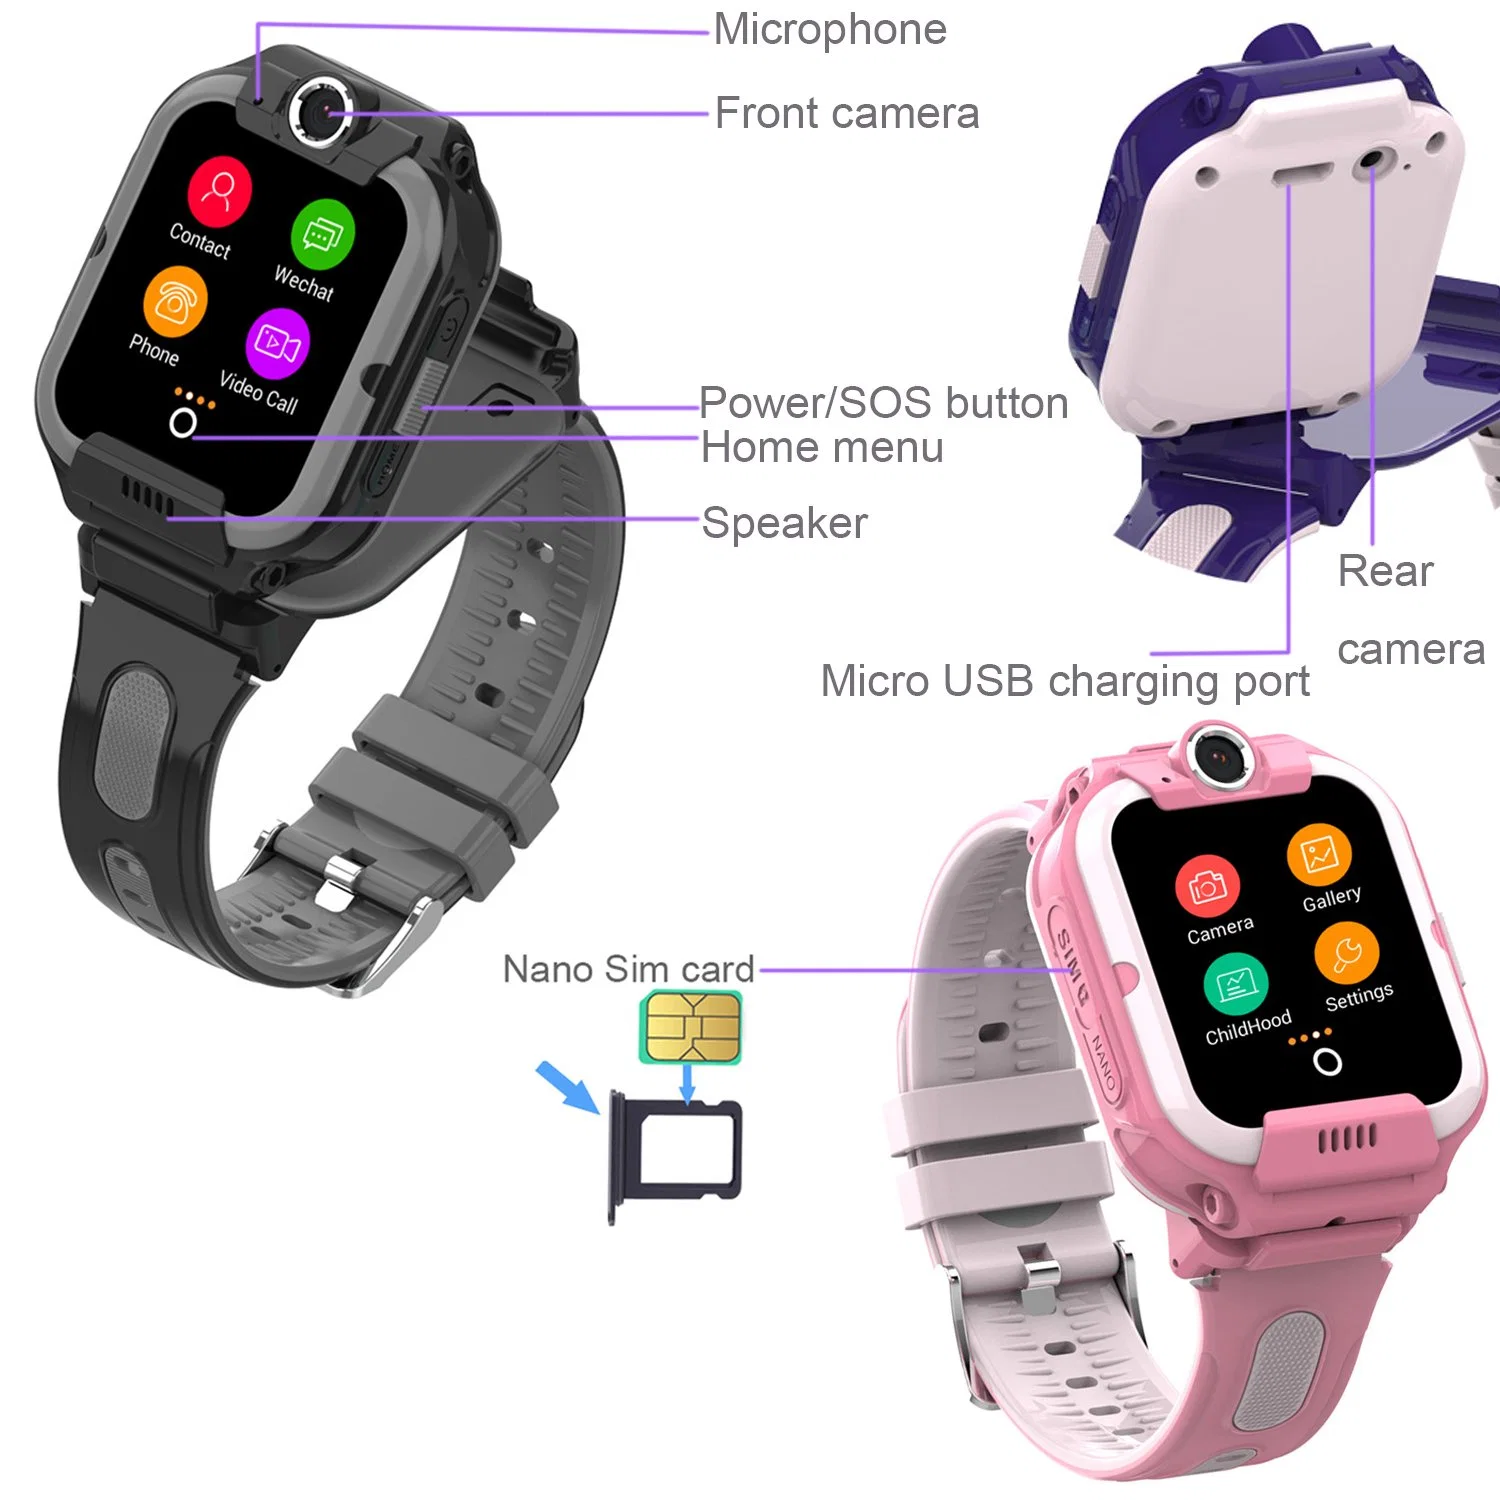 New Developed IP67 waterproof LTE Kids Smartwatch GPS Tracker device with Voice monitor intercom chatting for SOS call Video call D40